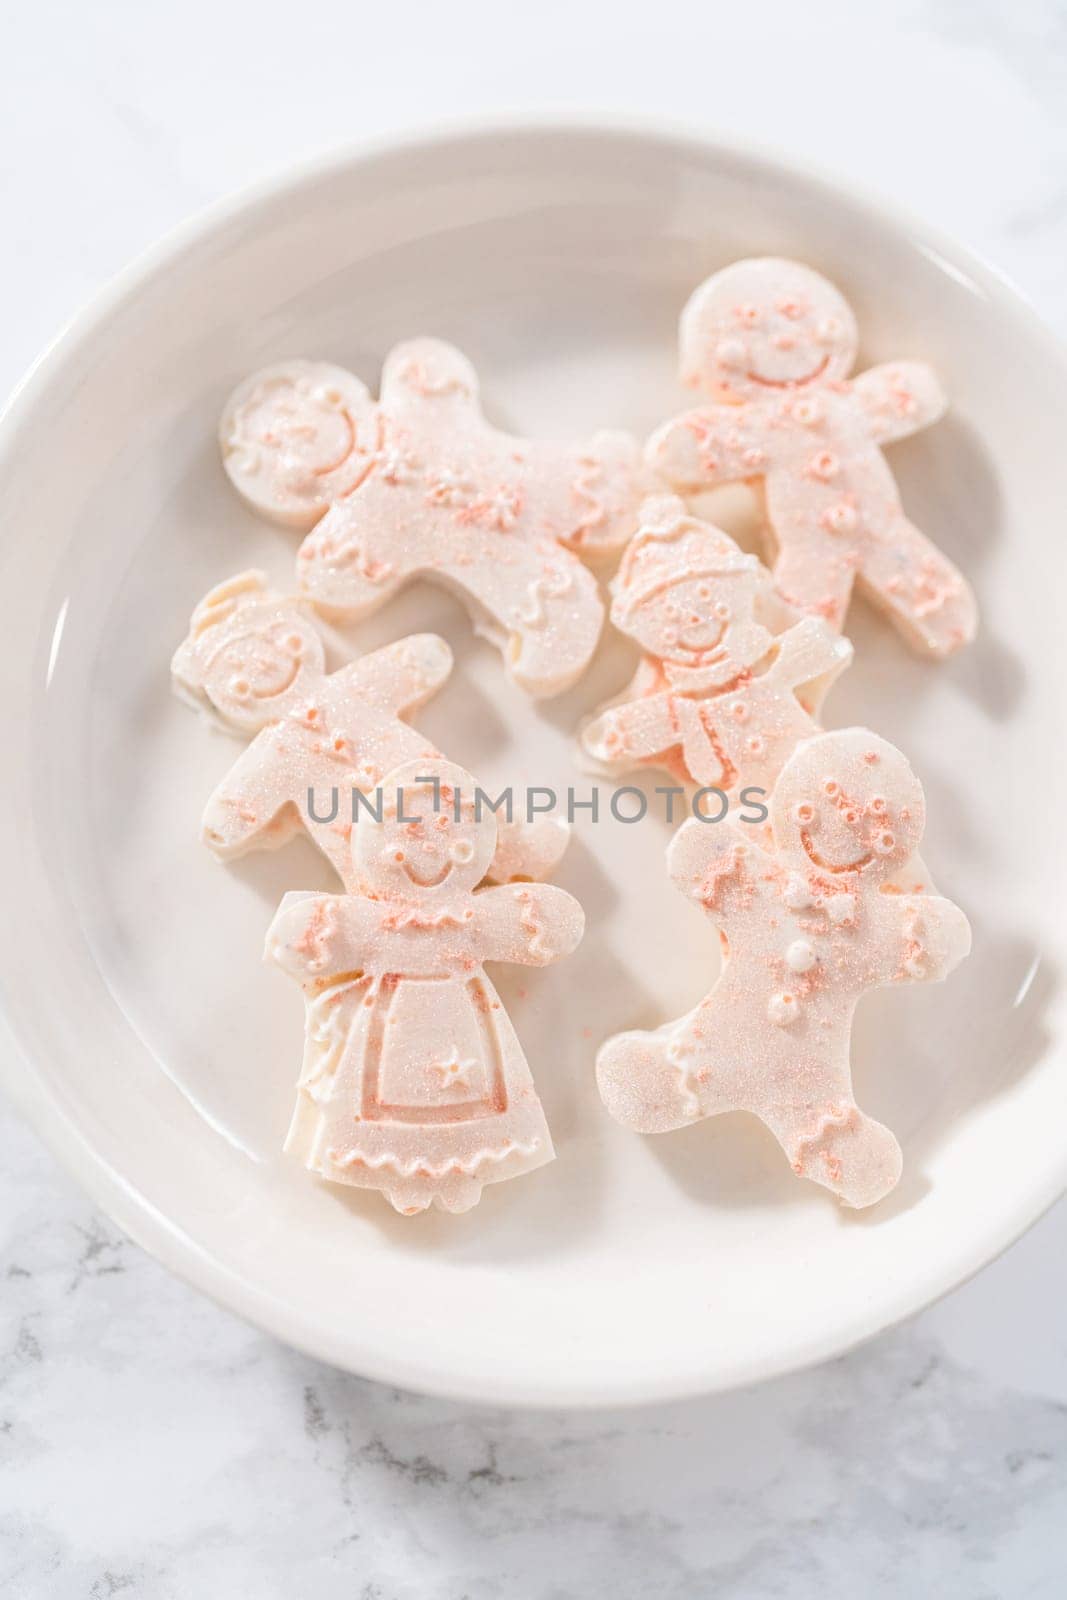 Chocolate gingerbread man with glitter on a white plate.